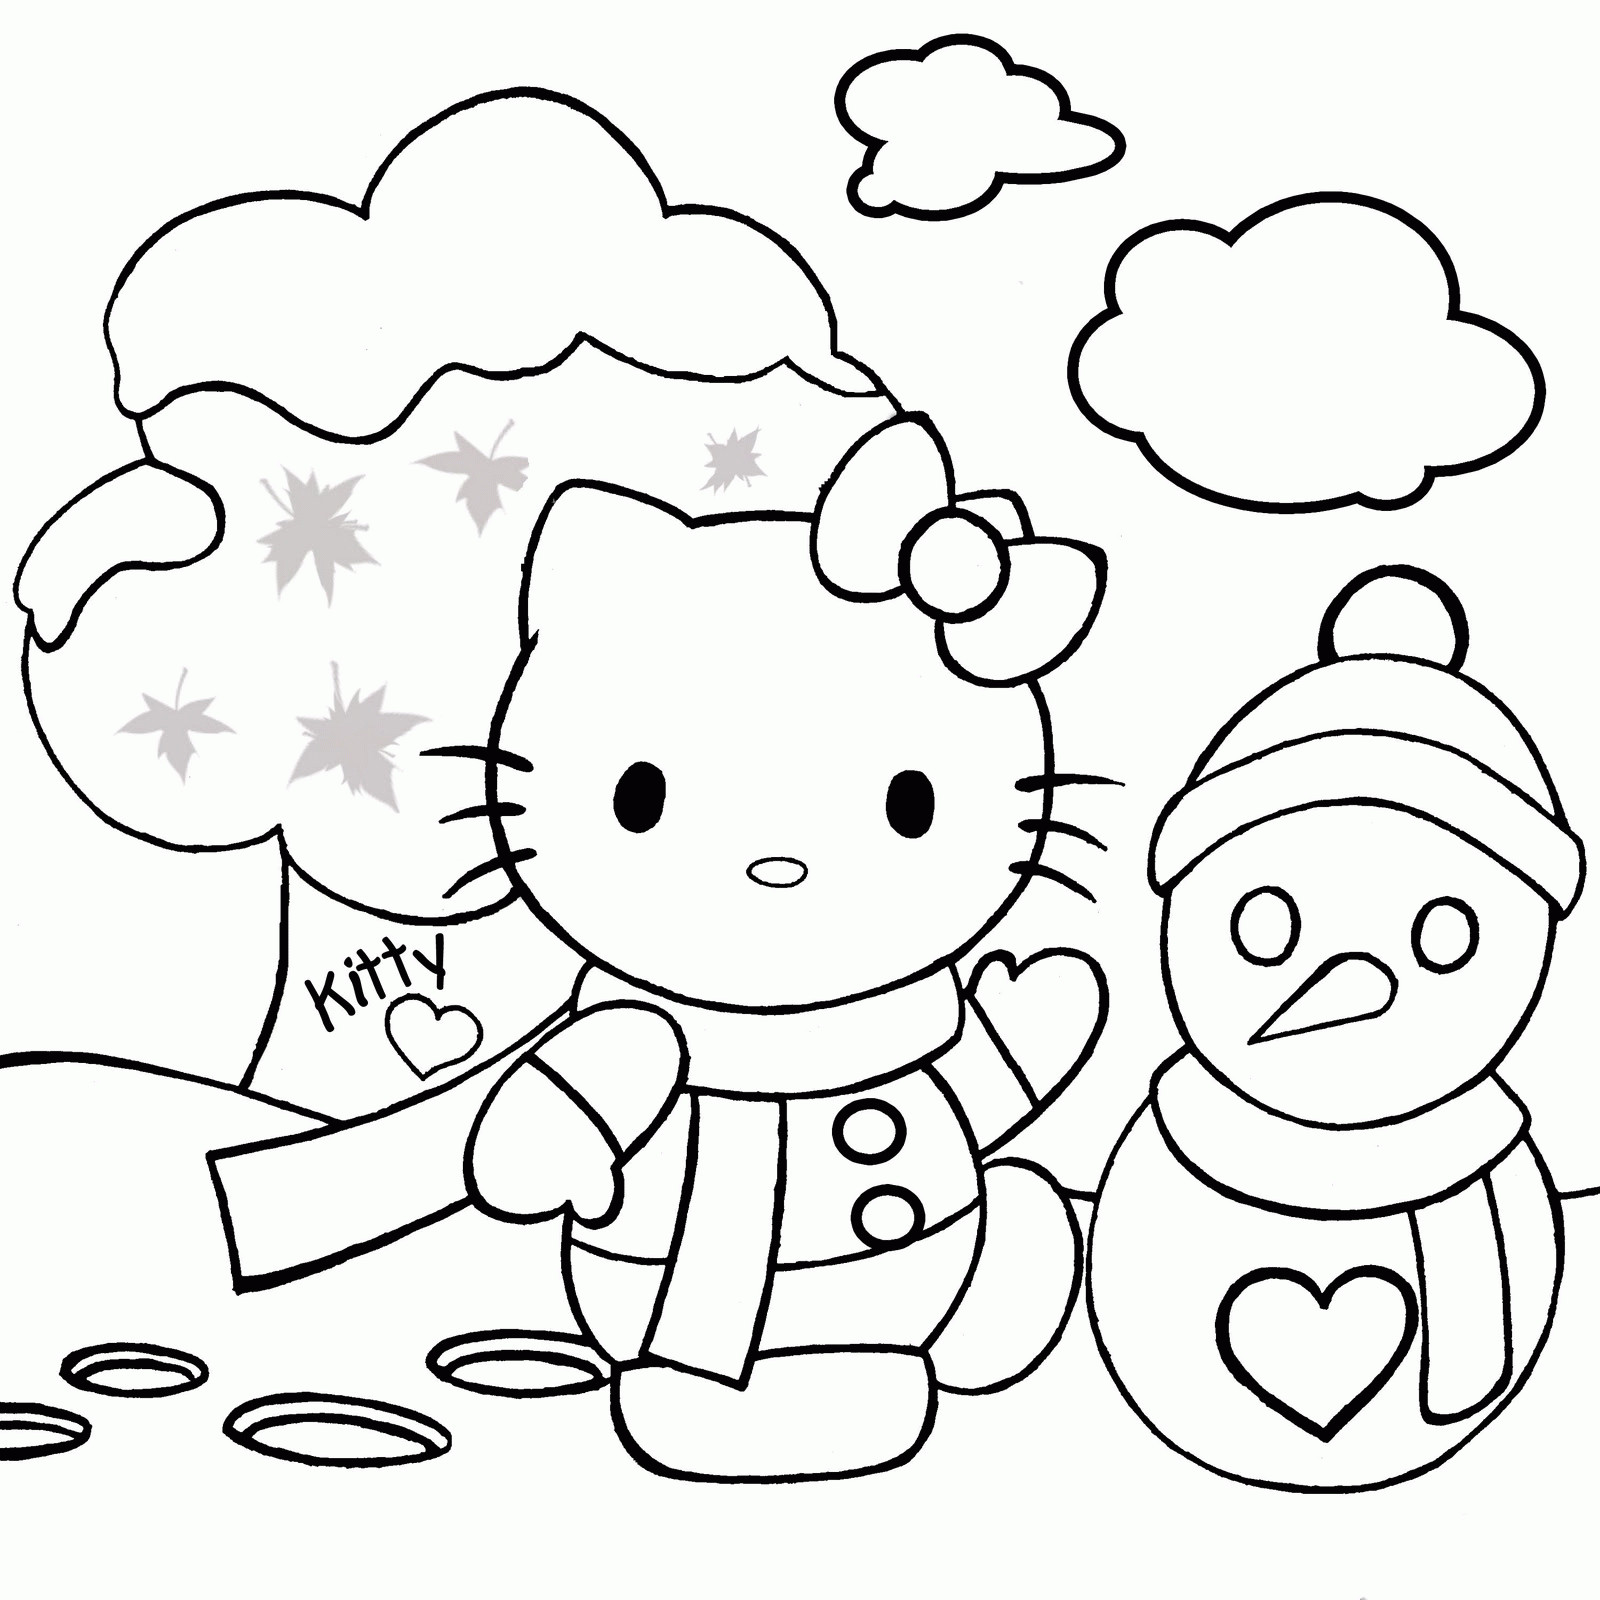 Girl Christmas Coloring Pages
 Christmas Coloring Pages For Girls Coloring Home